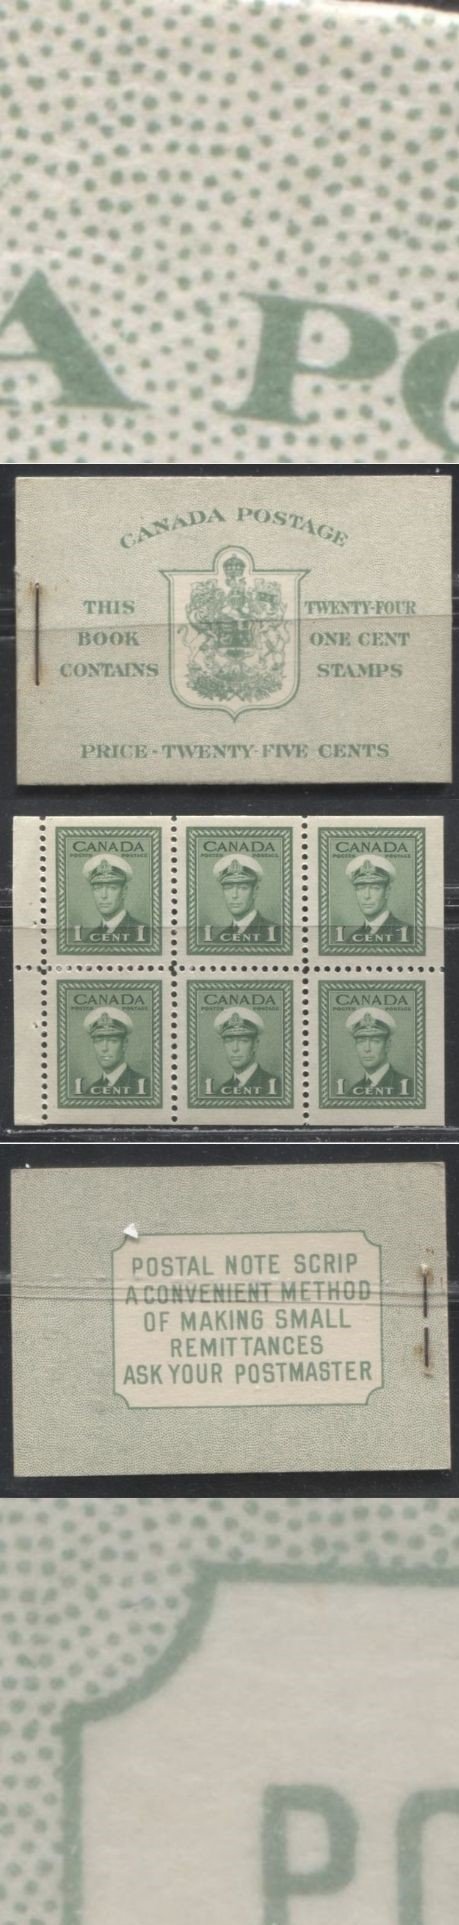 Lot 235 Canada #BK32d 1942-1949 War Issue, Complete English Booklet, 4 Panes of 1c Green, Vertical Wove, Harris Front Cover IIa, Back Cover Type Cai, 6c & 7c Rates